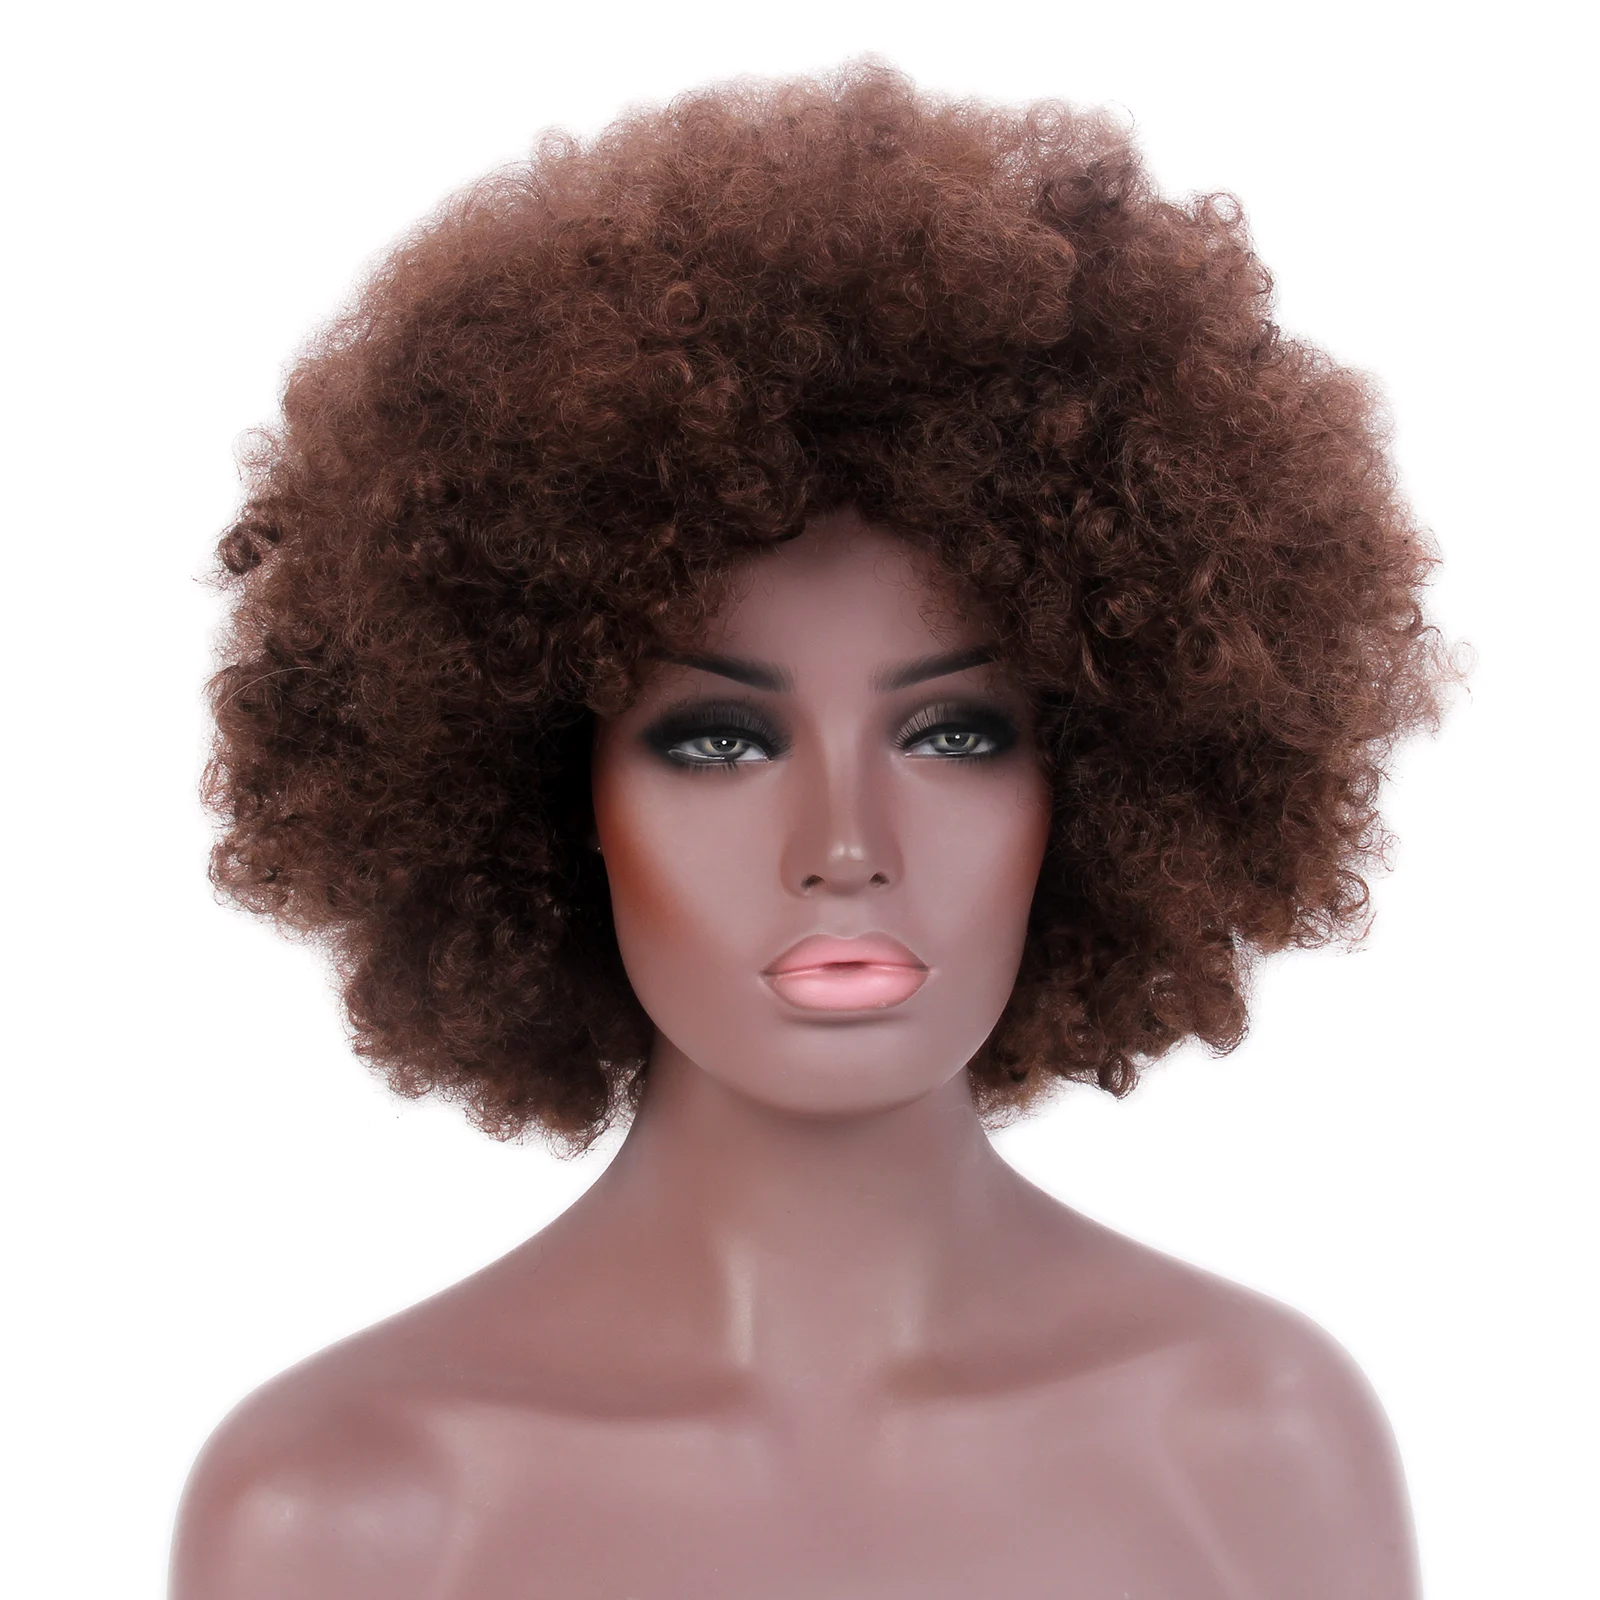 Afro Kinky Curly Wig Short Black Synthetic Wigs For Black Women Afro Wig Buy Afro Wig For